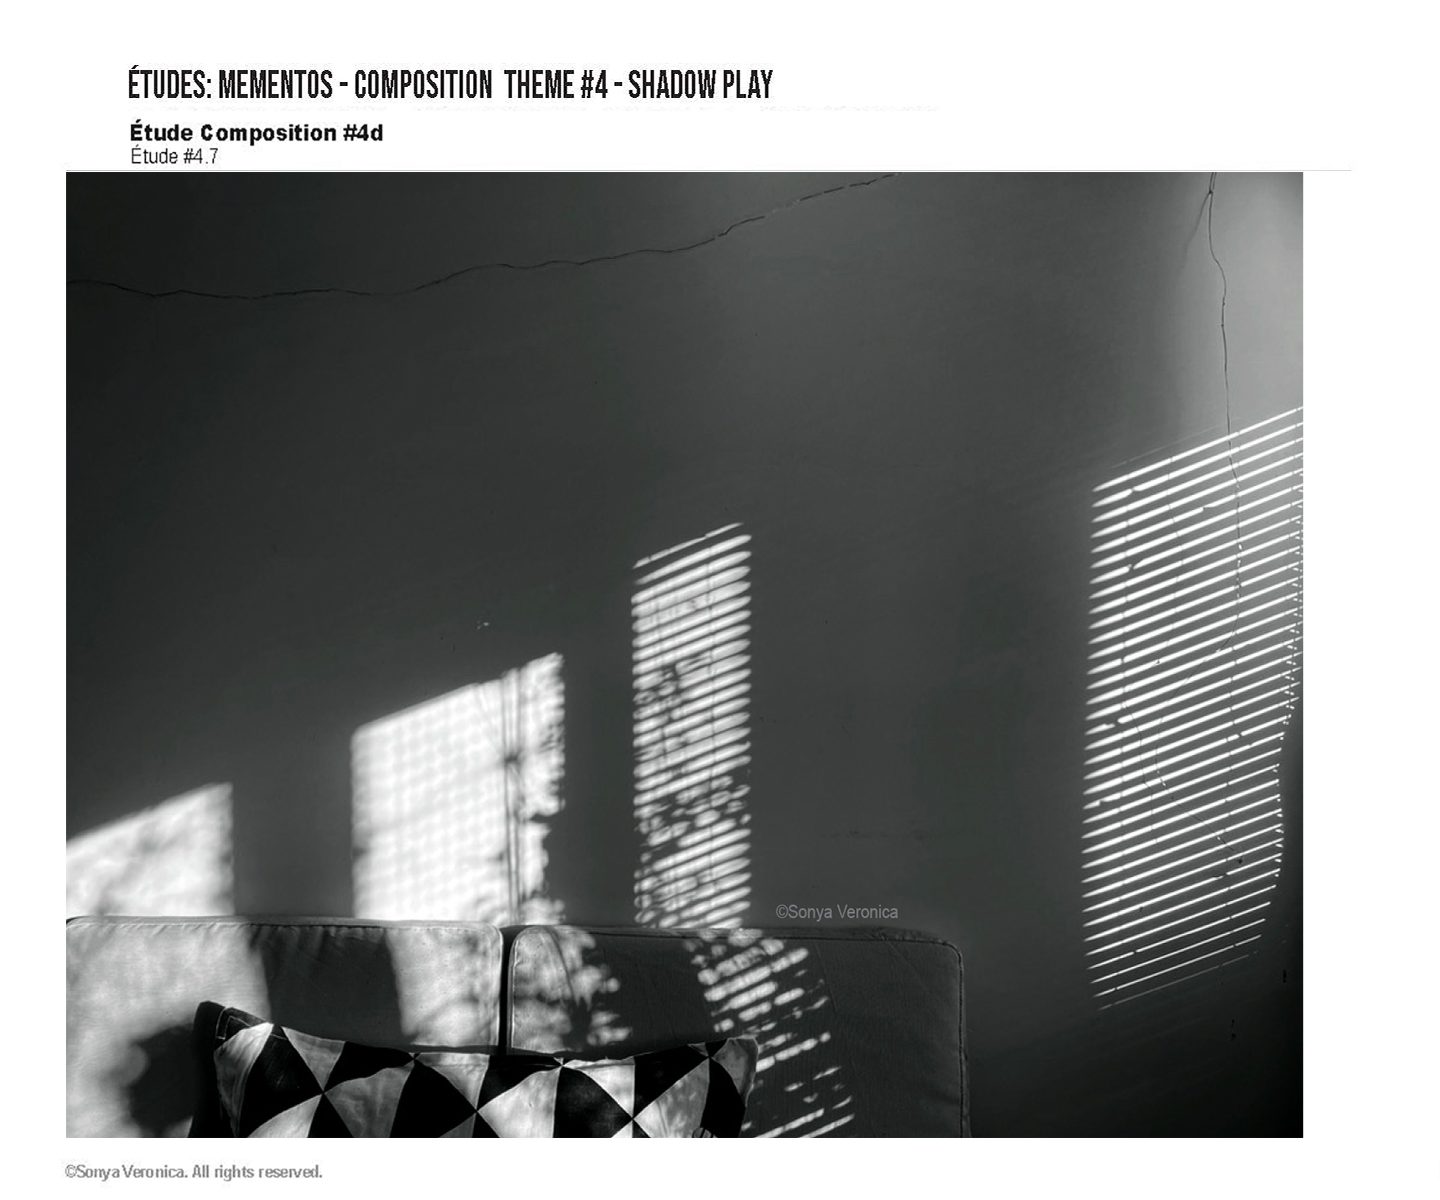 A black and white photographic composition depicting mid morning sun shadows from the nearby windows and their venetian blinds fallen over the different planes of cushions of the sofa sitting perpendicular to the window.